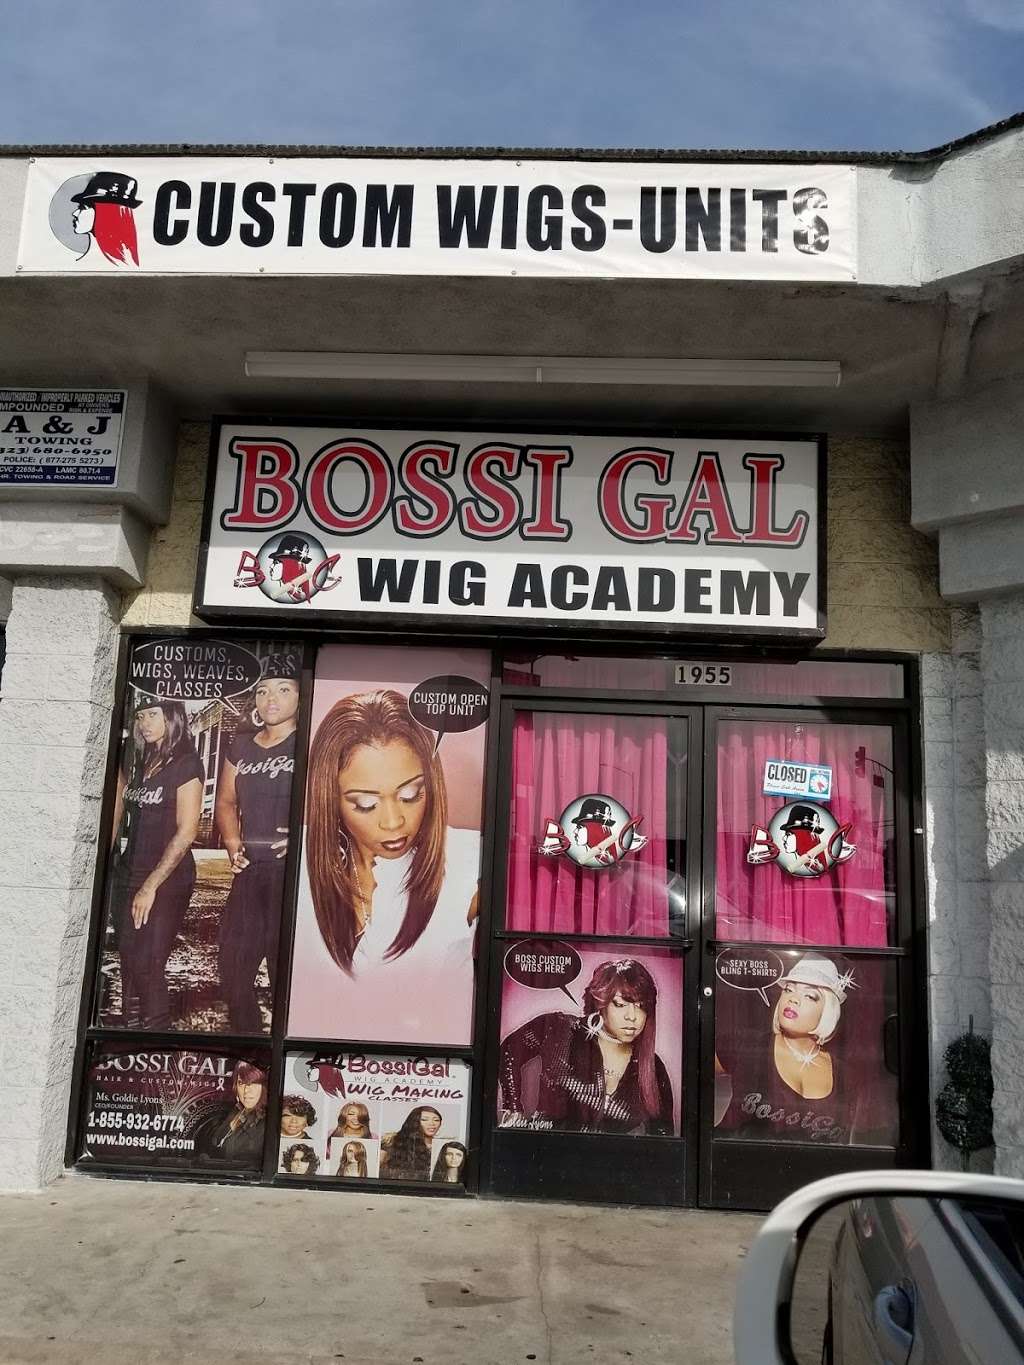 Bossi Gal Wig Academy | 2924, 1955 W Manchester Ave, Los Angeles, CA 90047, USA | Phone: (855) 932-6774